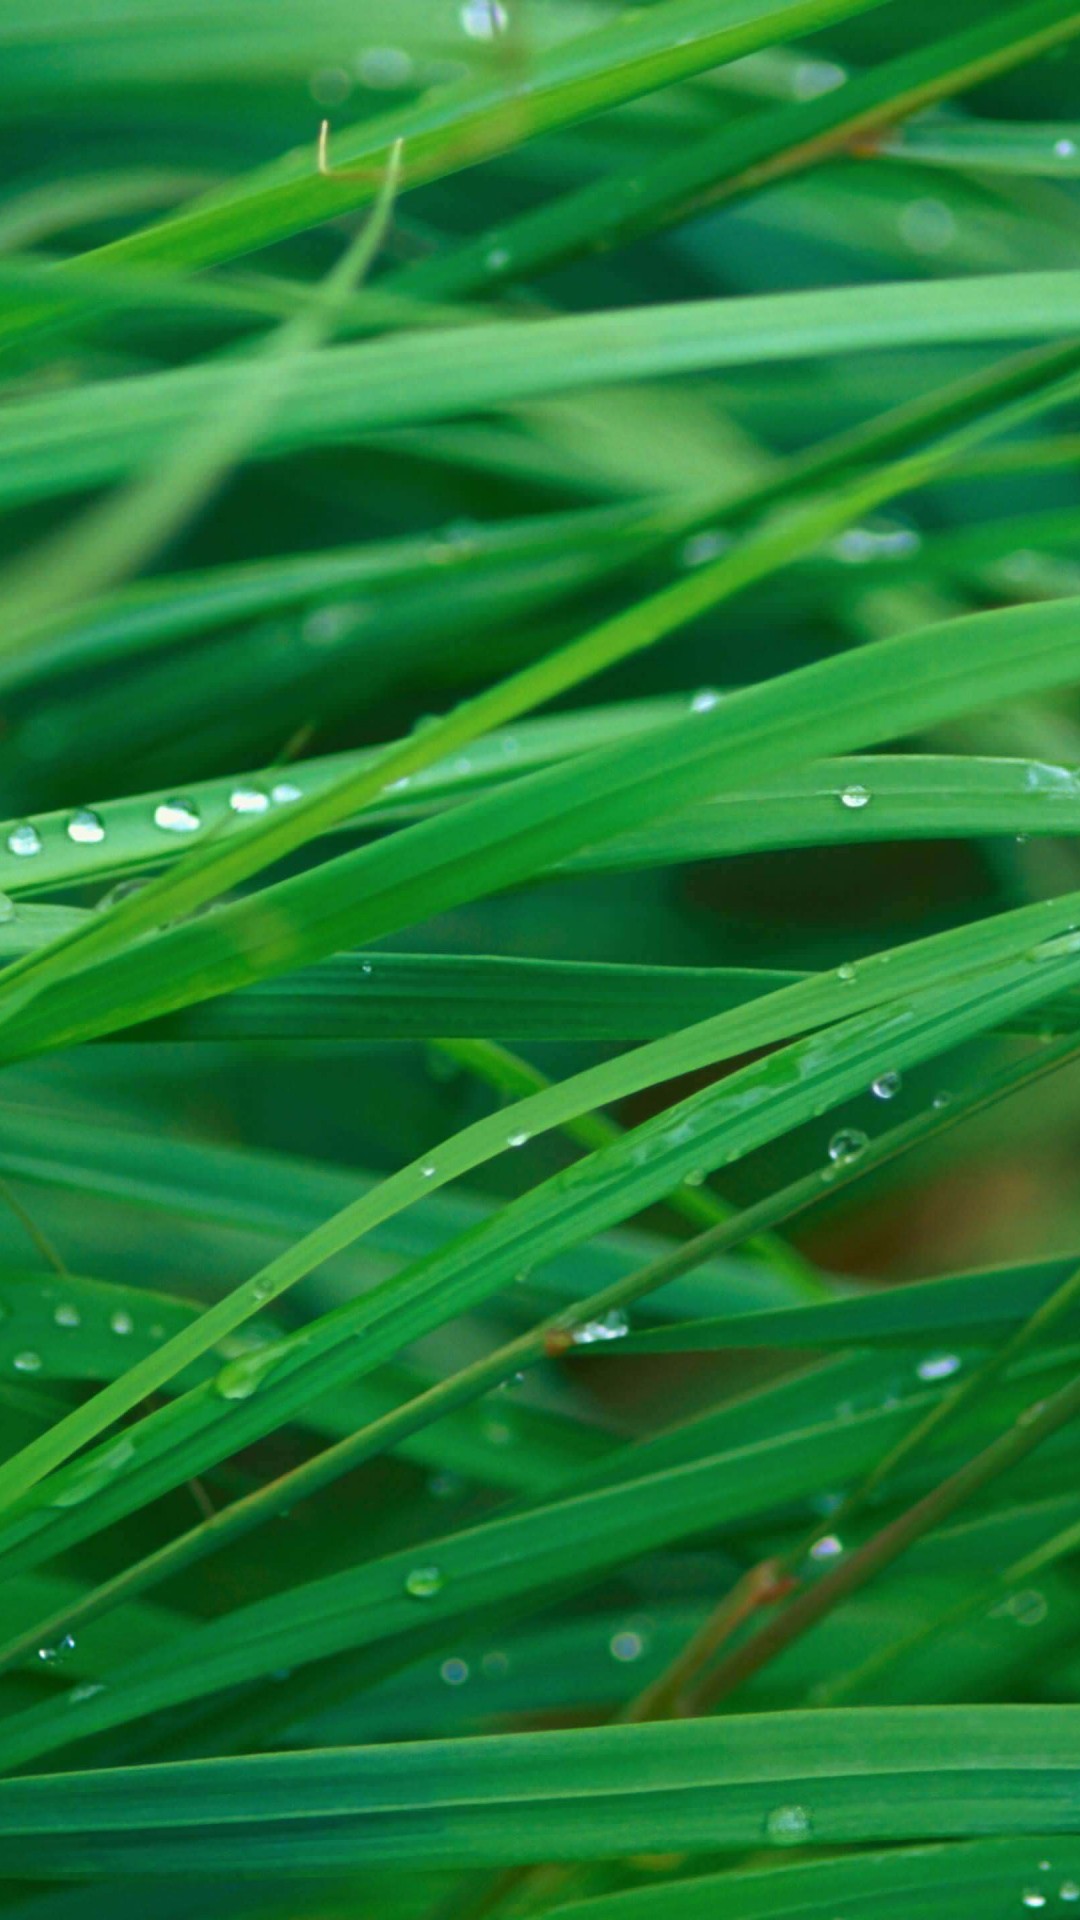 Green Blades Of Grass Wallpaper for SONY Xperia Z2